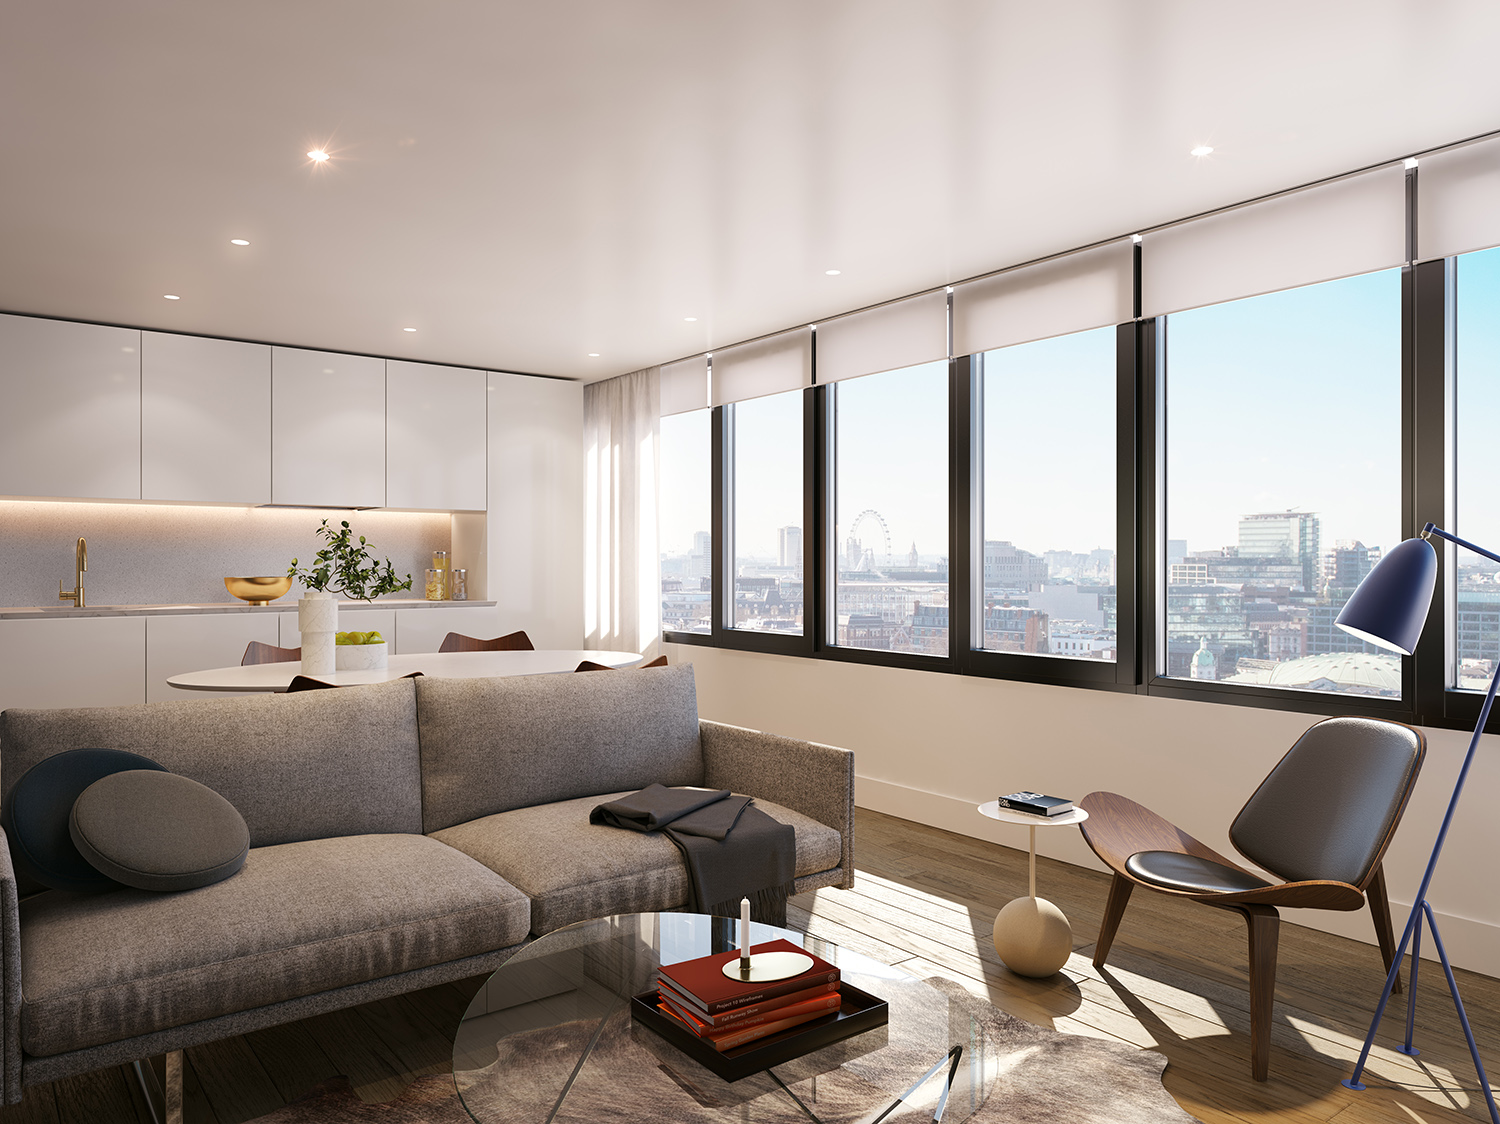 Interiors conceived by Conran & Partners for Blake Tower apartments